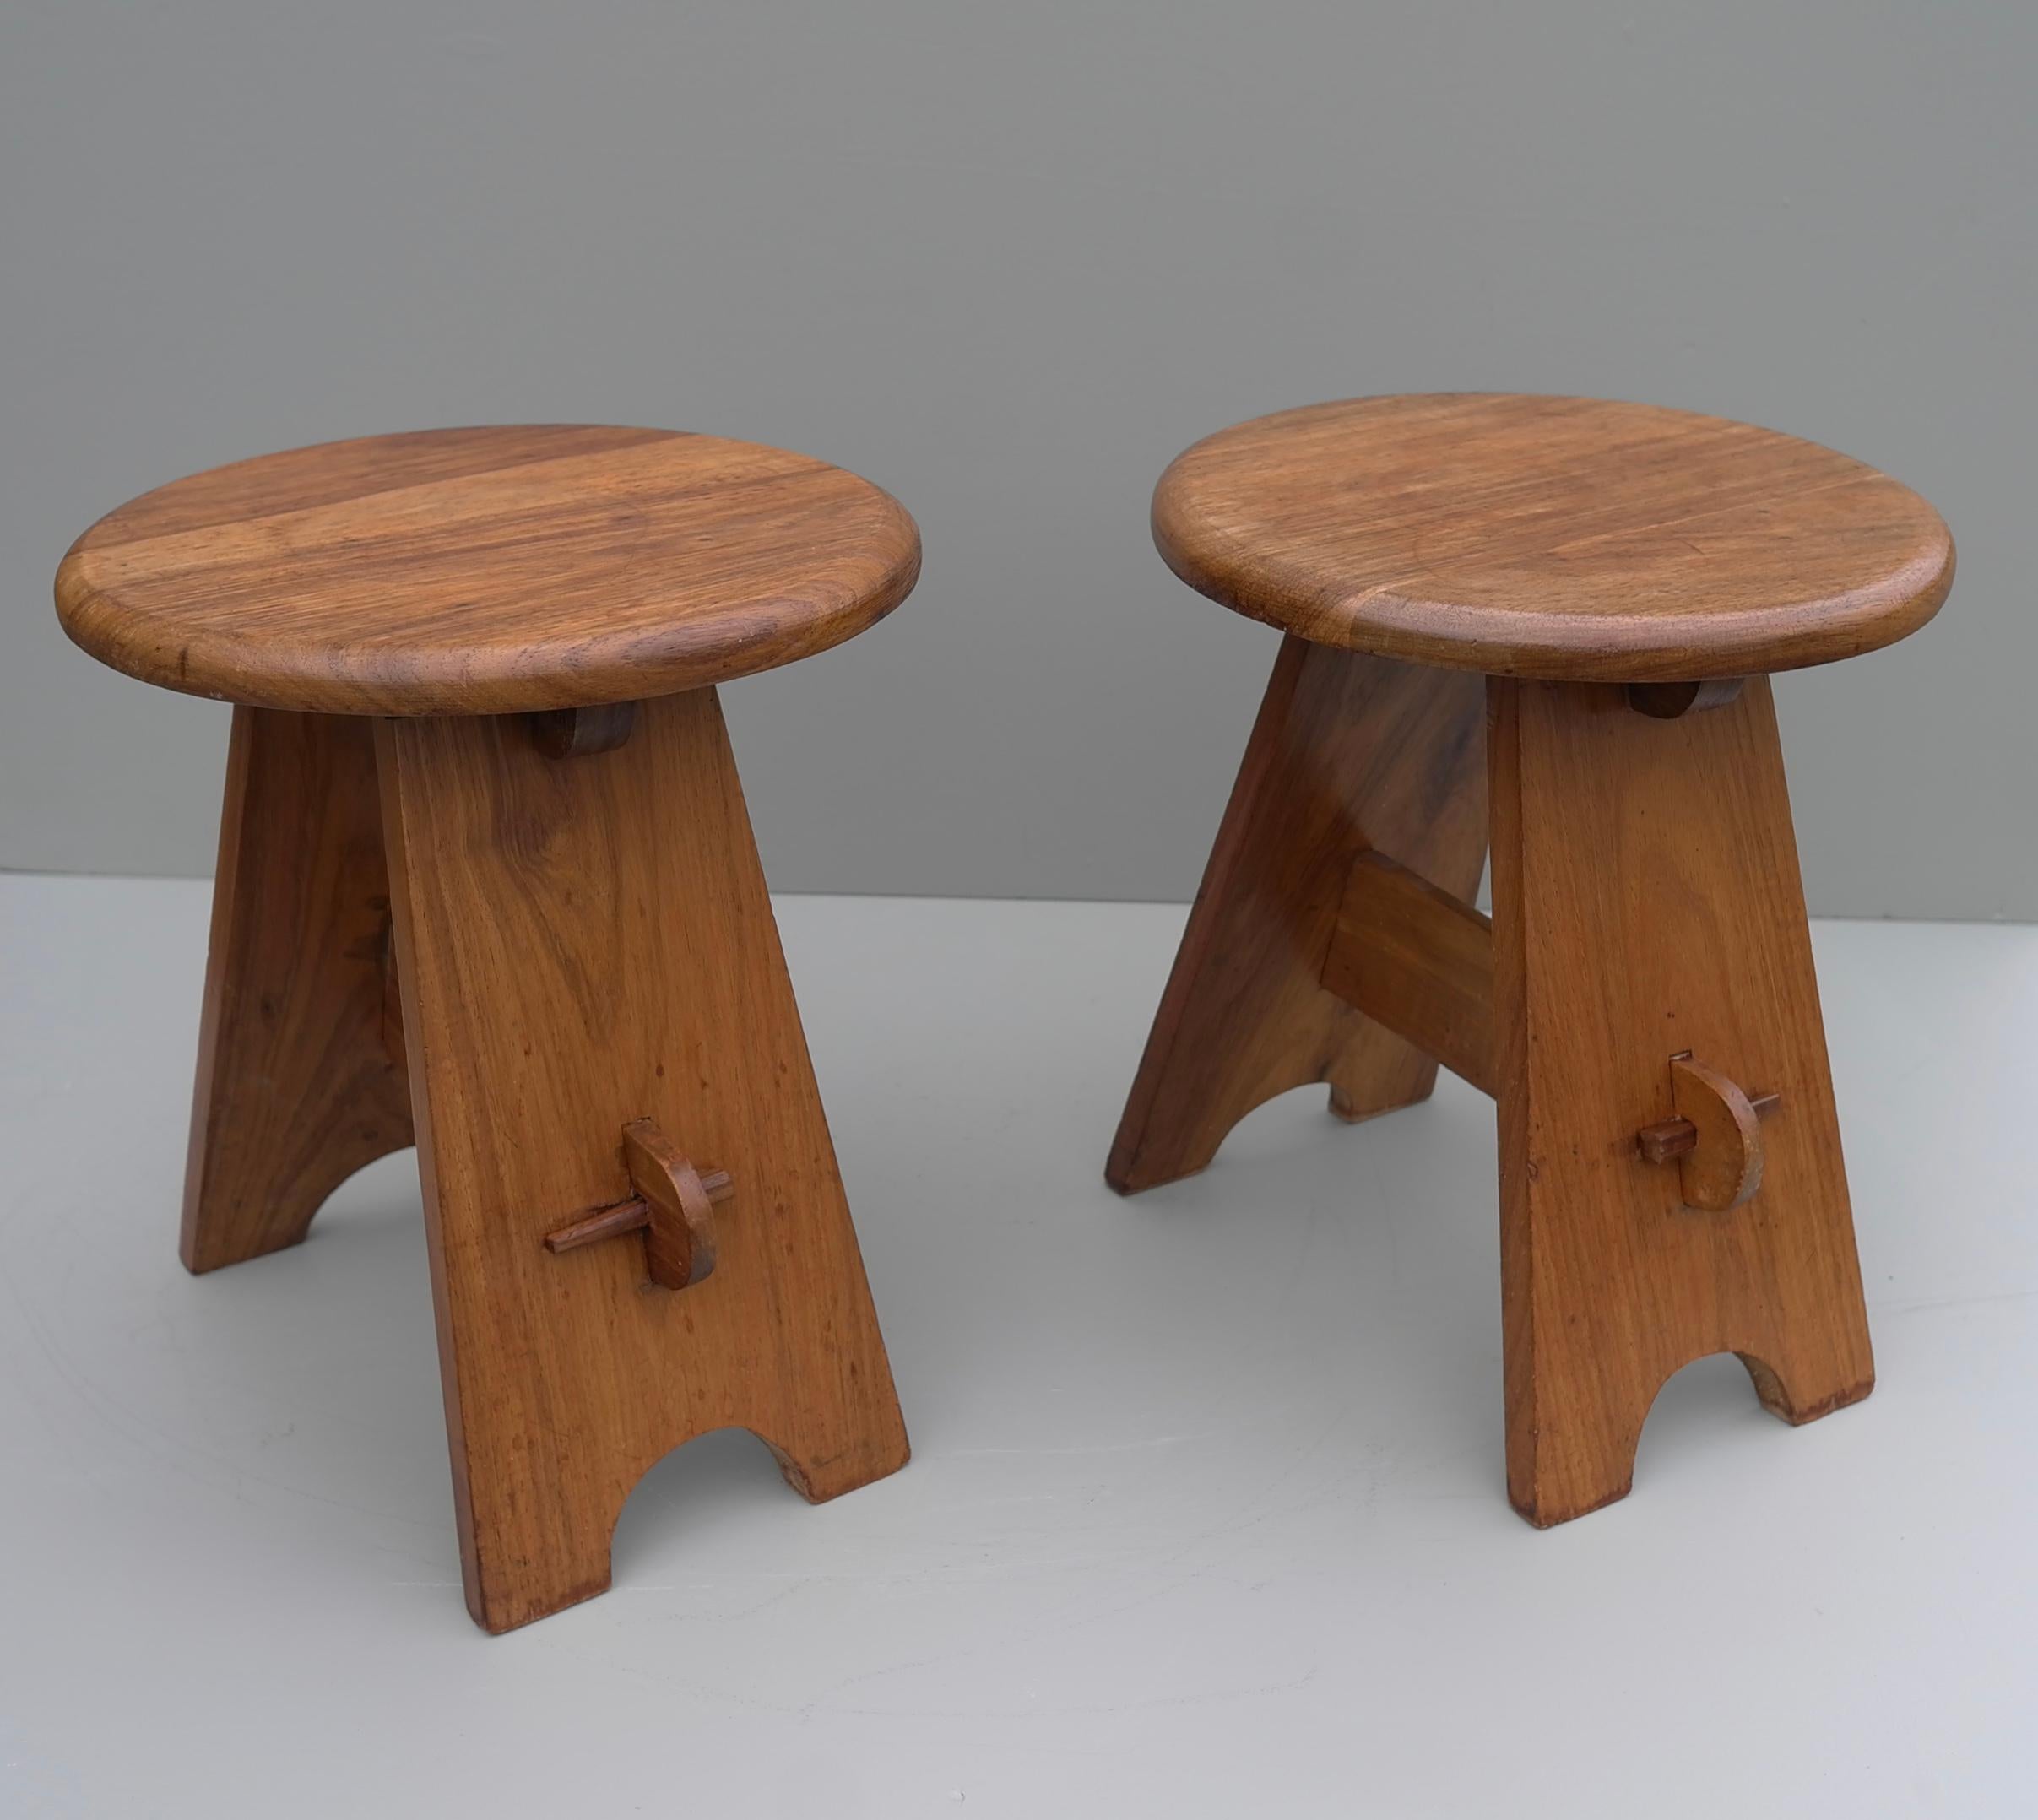 Pair of Midcentury Stools in Solid Elm Wood, France, 1950s For Sale 2